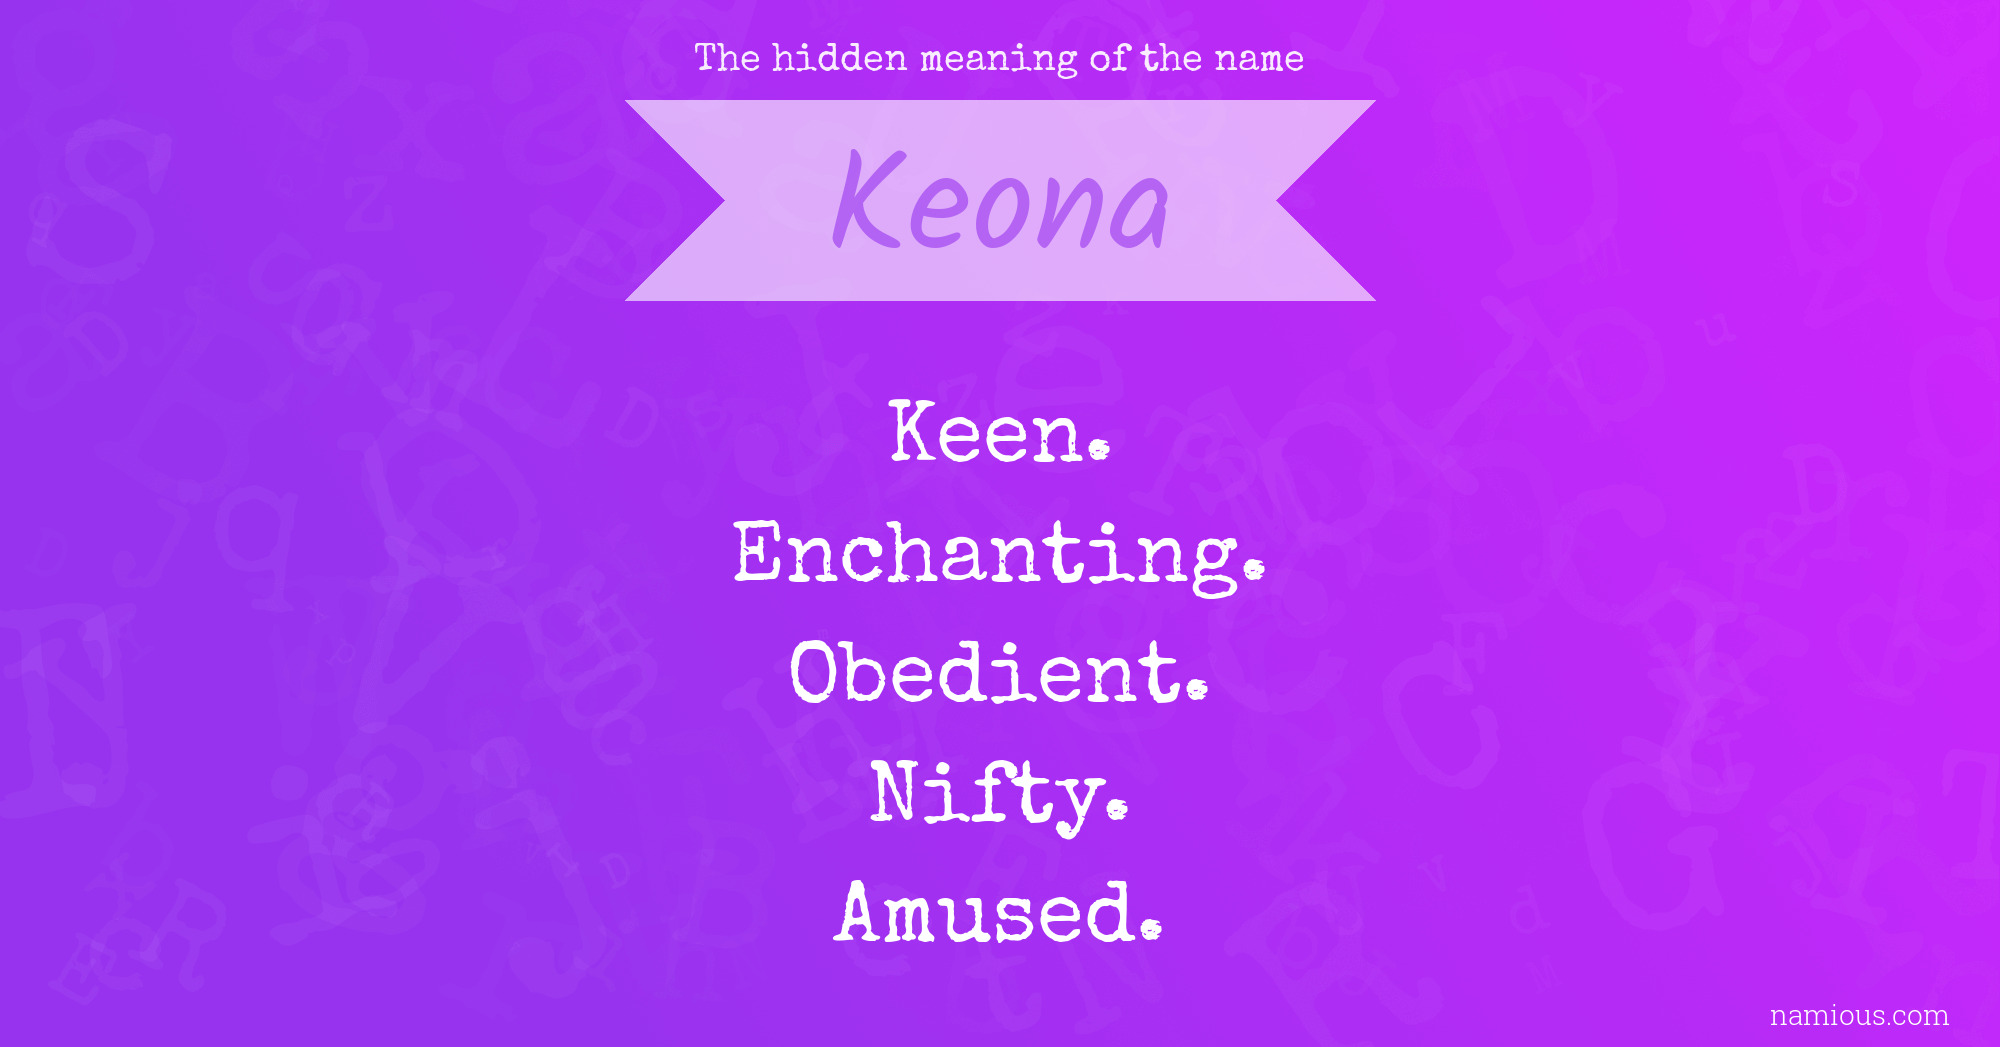 The hidden meaning of the name Keona